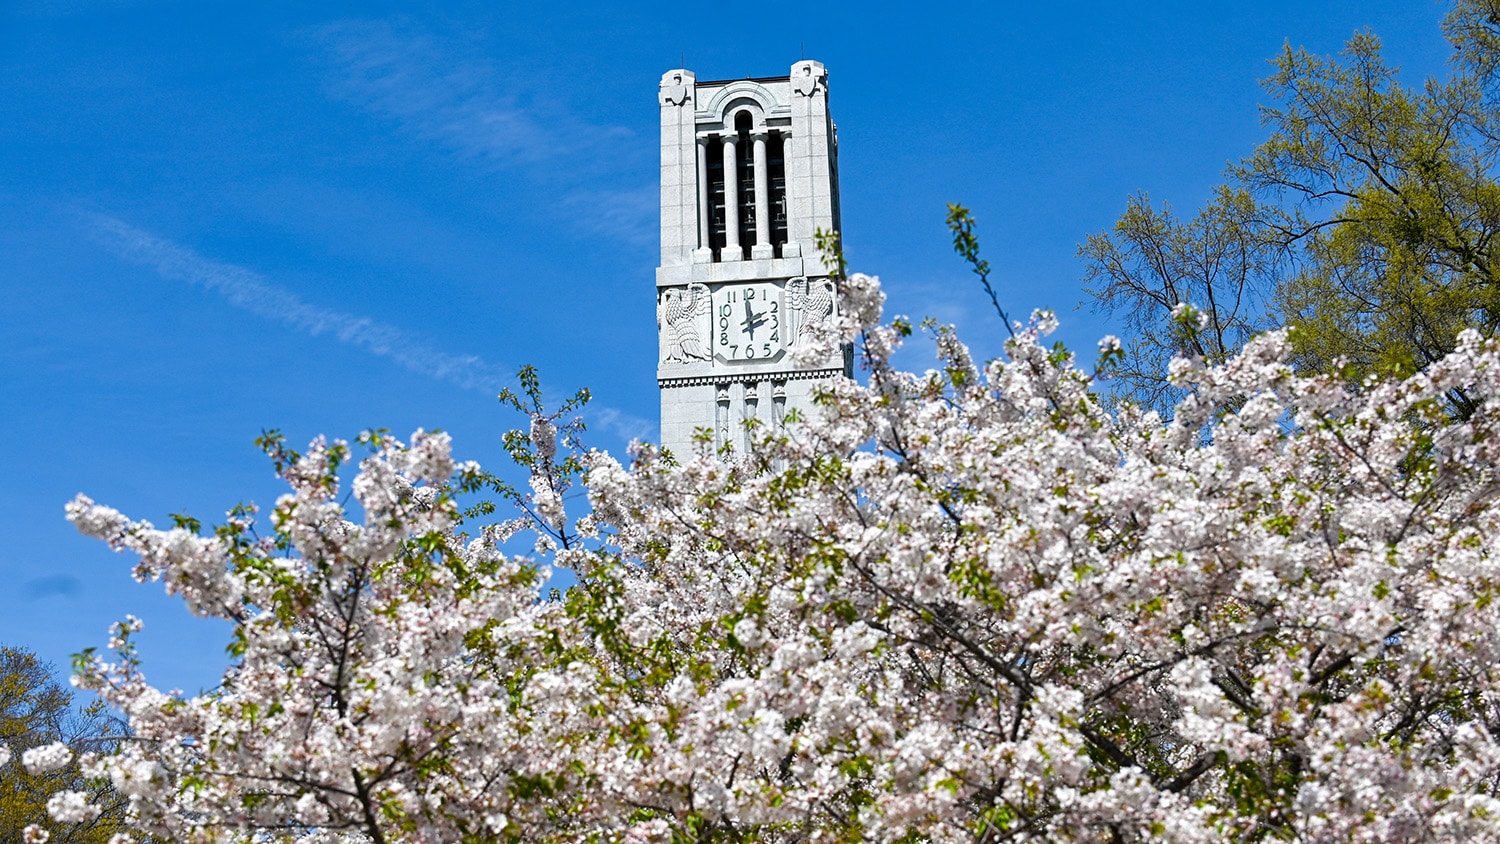 NC State Belltower in the spring with a blooming tree in front.